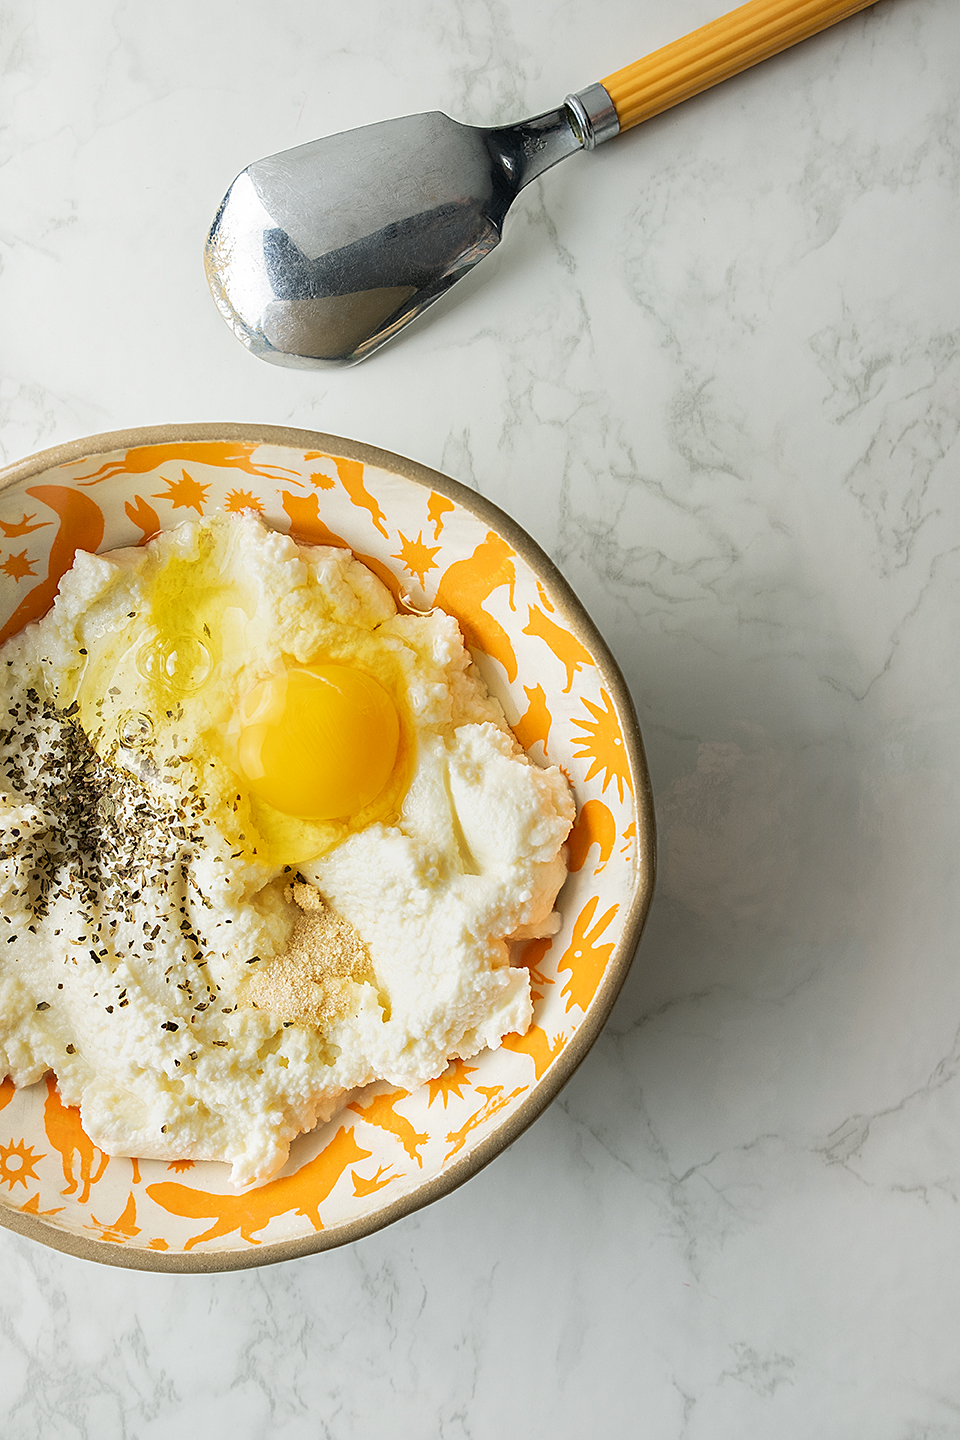  Orange bowl with fat free ricotta, egg and seasoning on a marble background with vintage spoon.  